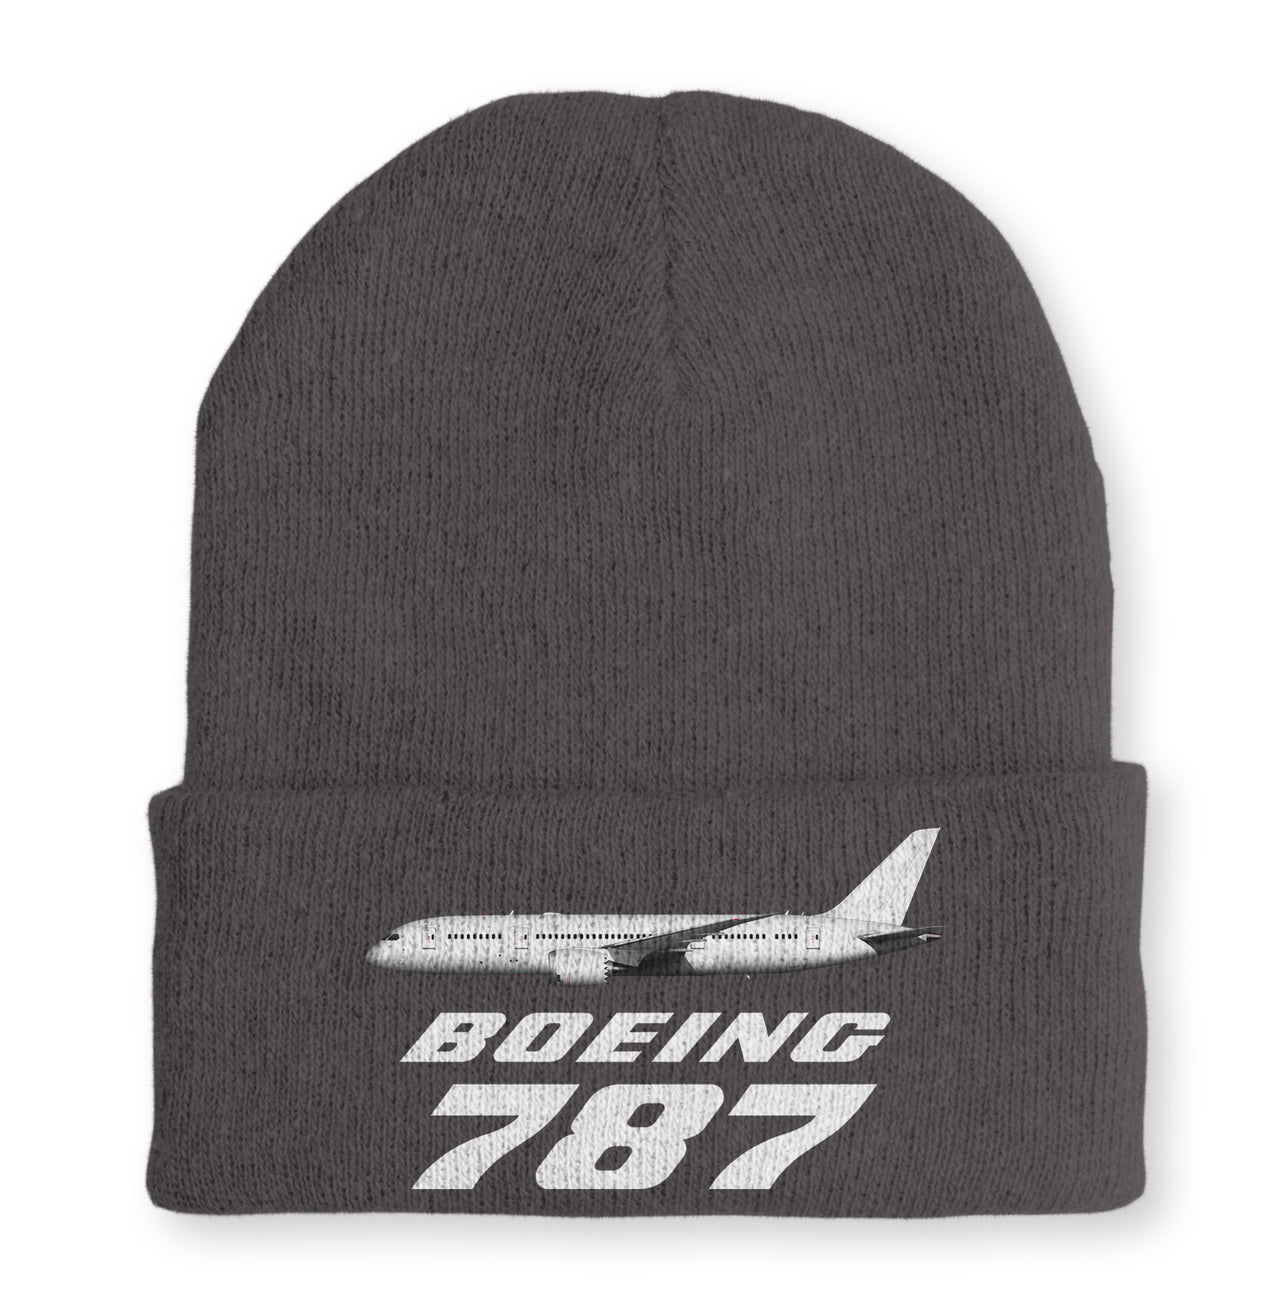 The Boeing 787 Embroidered Beanies